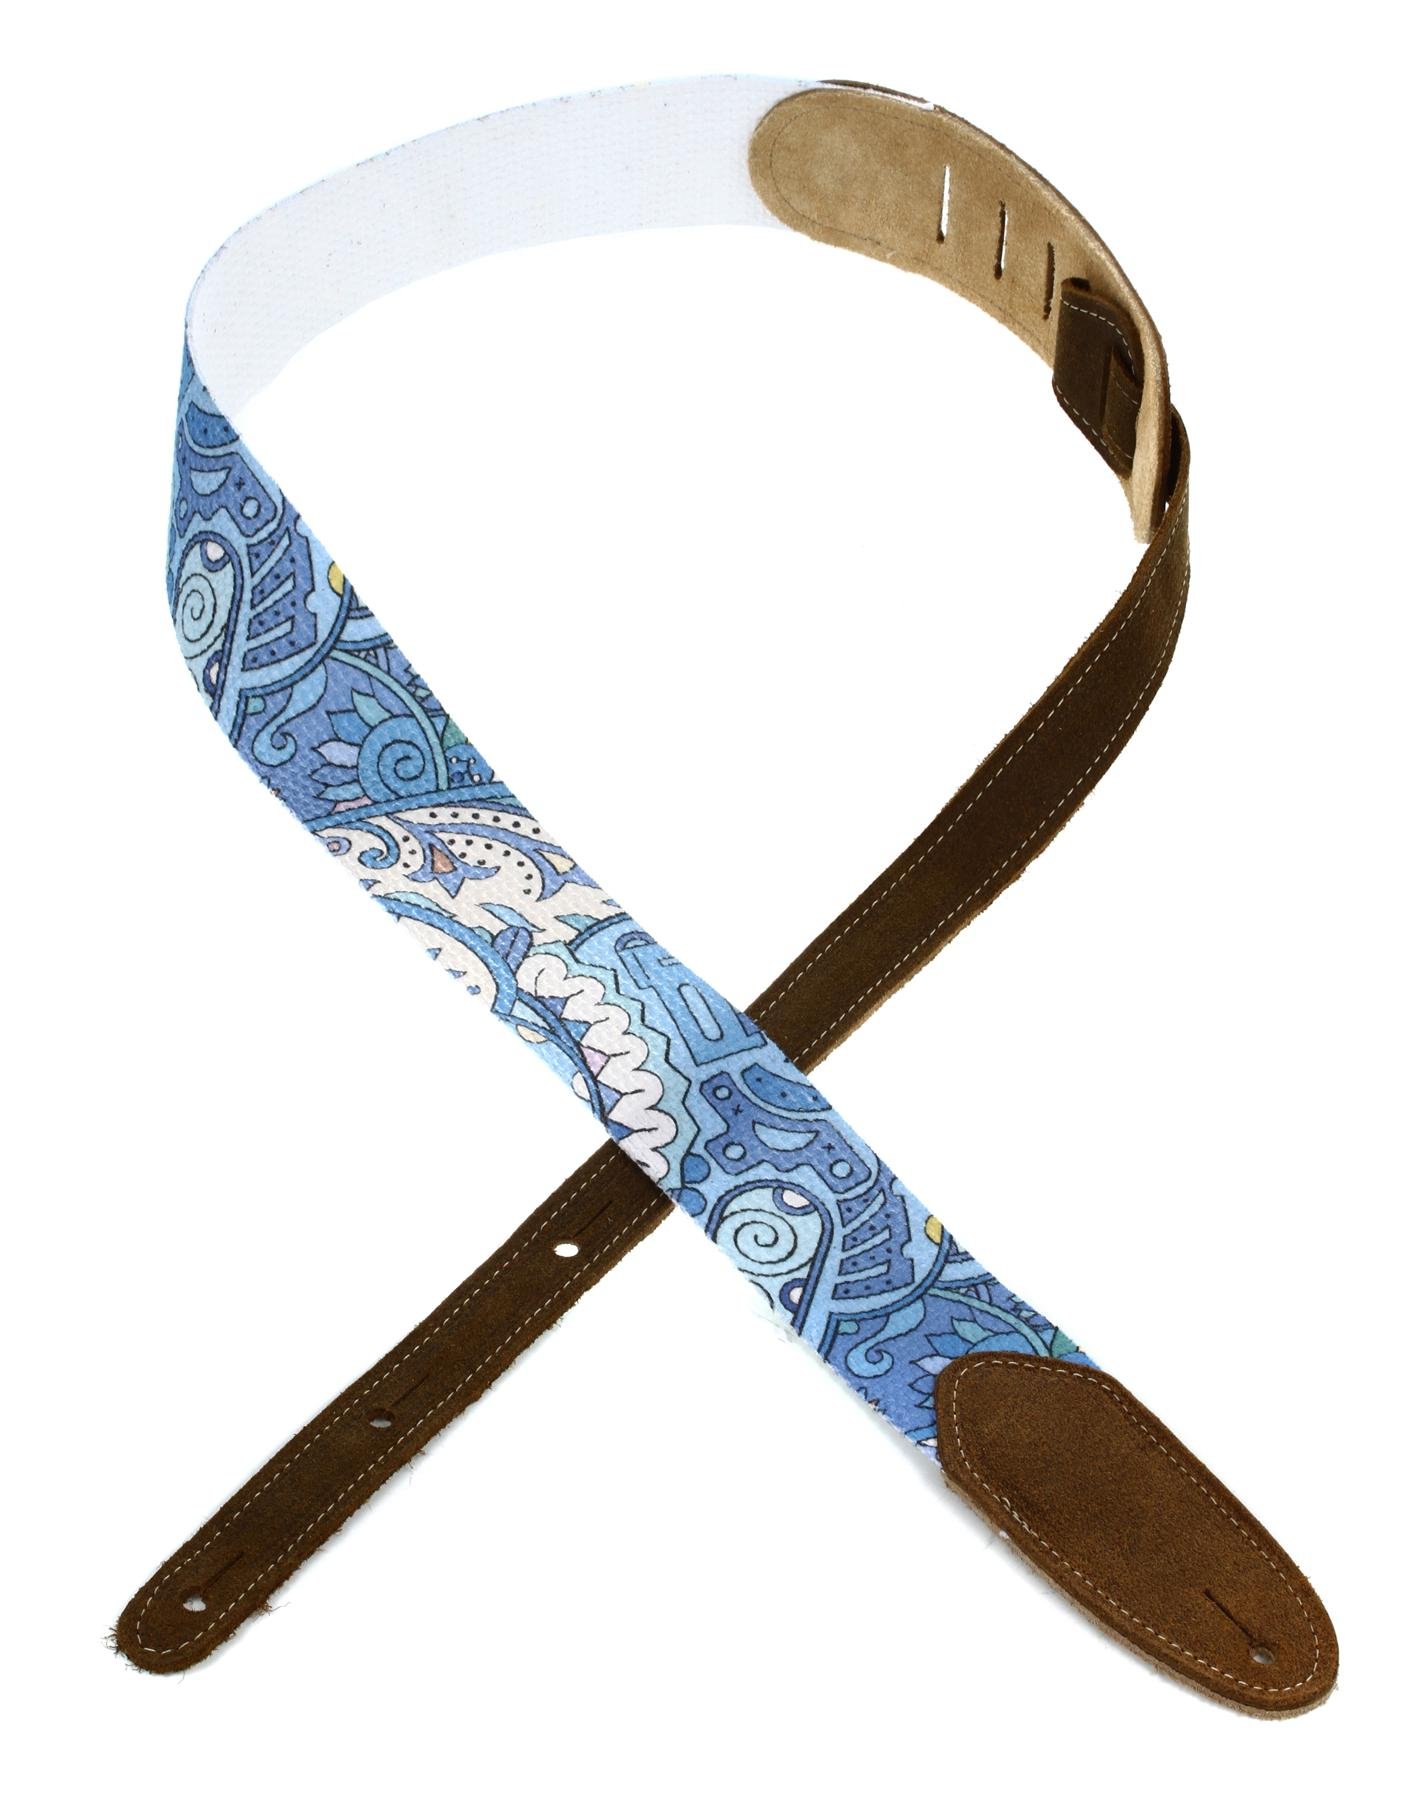 LM Products Woodstock Series Guitar Strap - Blue | Sweetwater